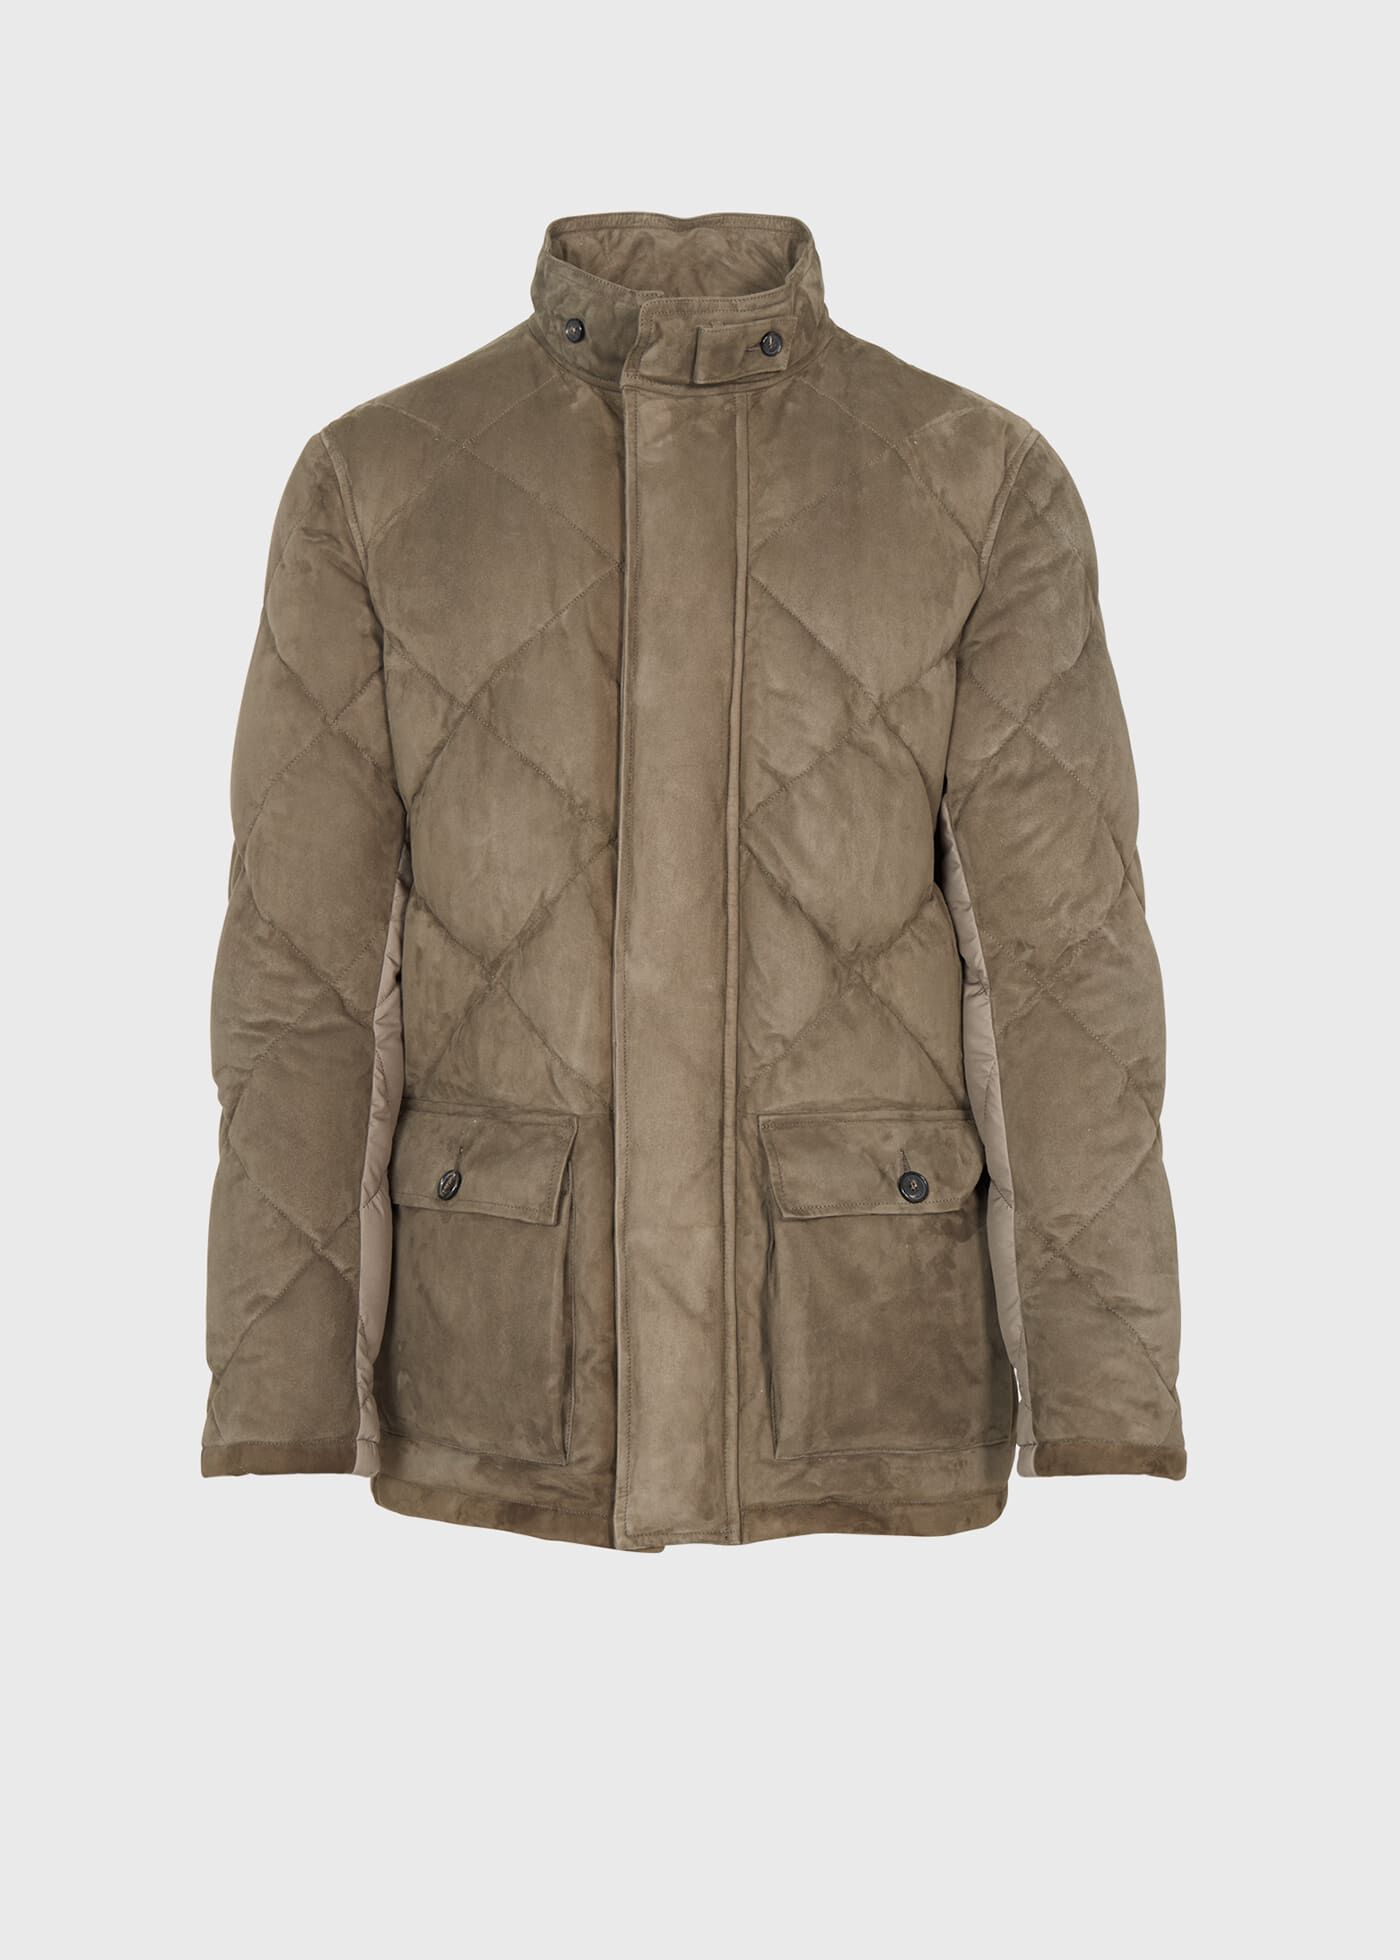 PS45 Clearance - Phineas Cole Jackets and Outerwear - Paul Stuart